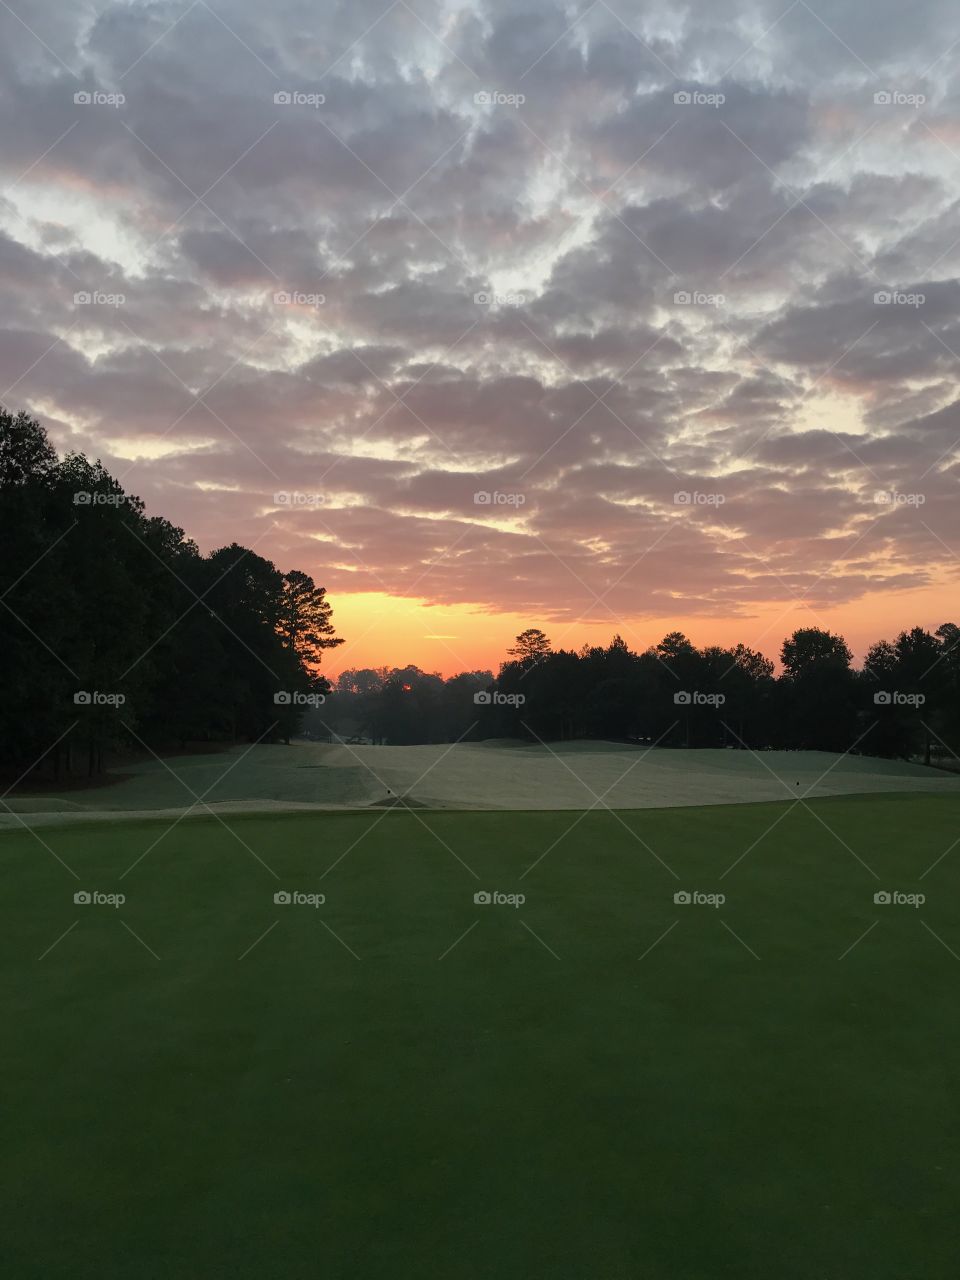 Perfect ending to 18 holes